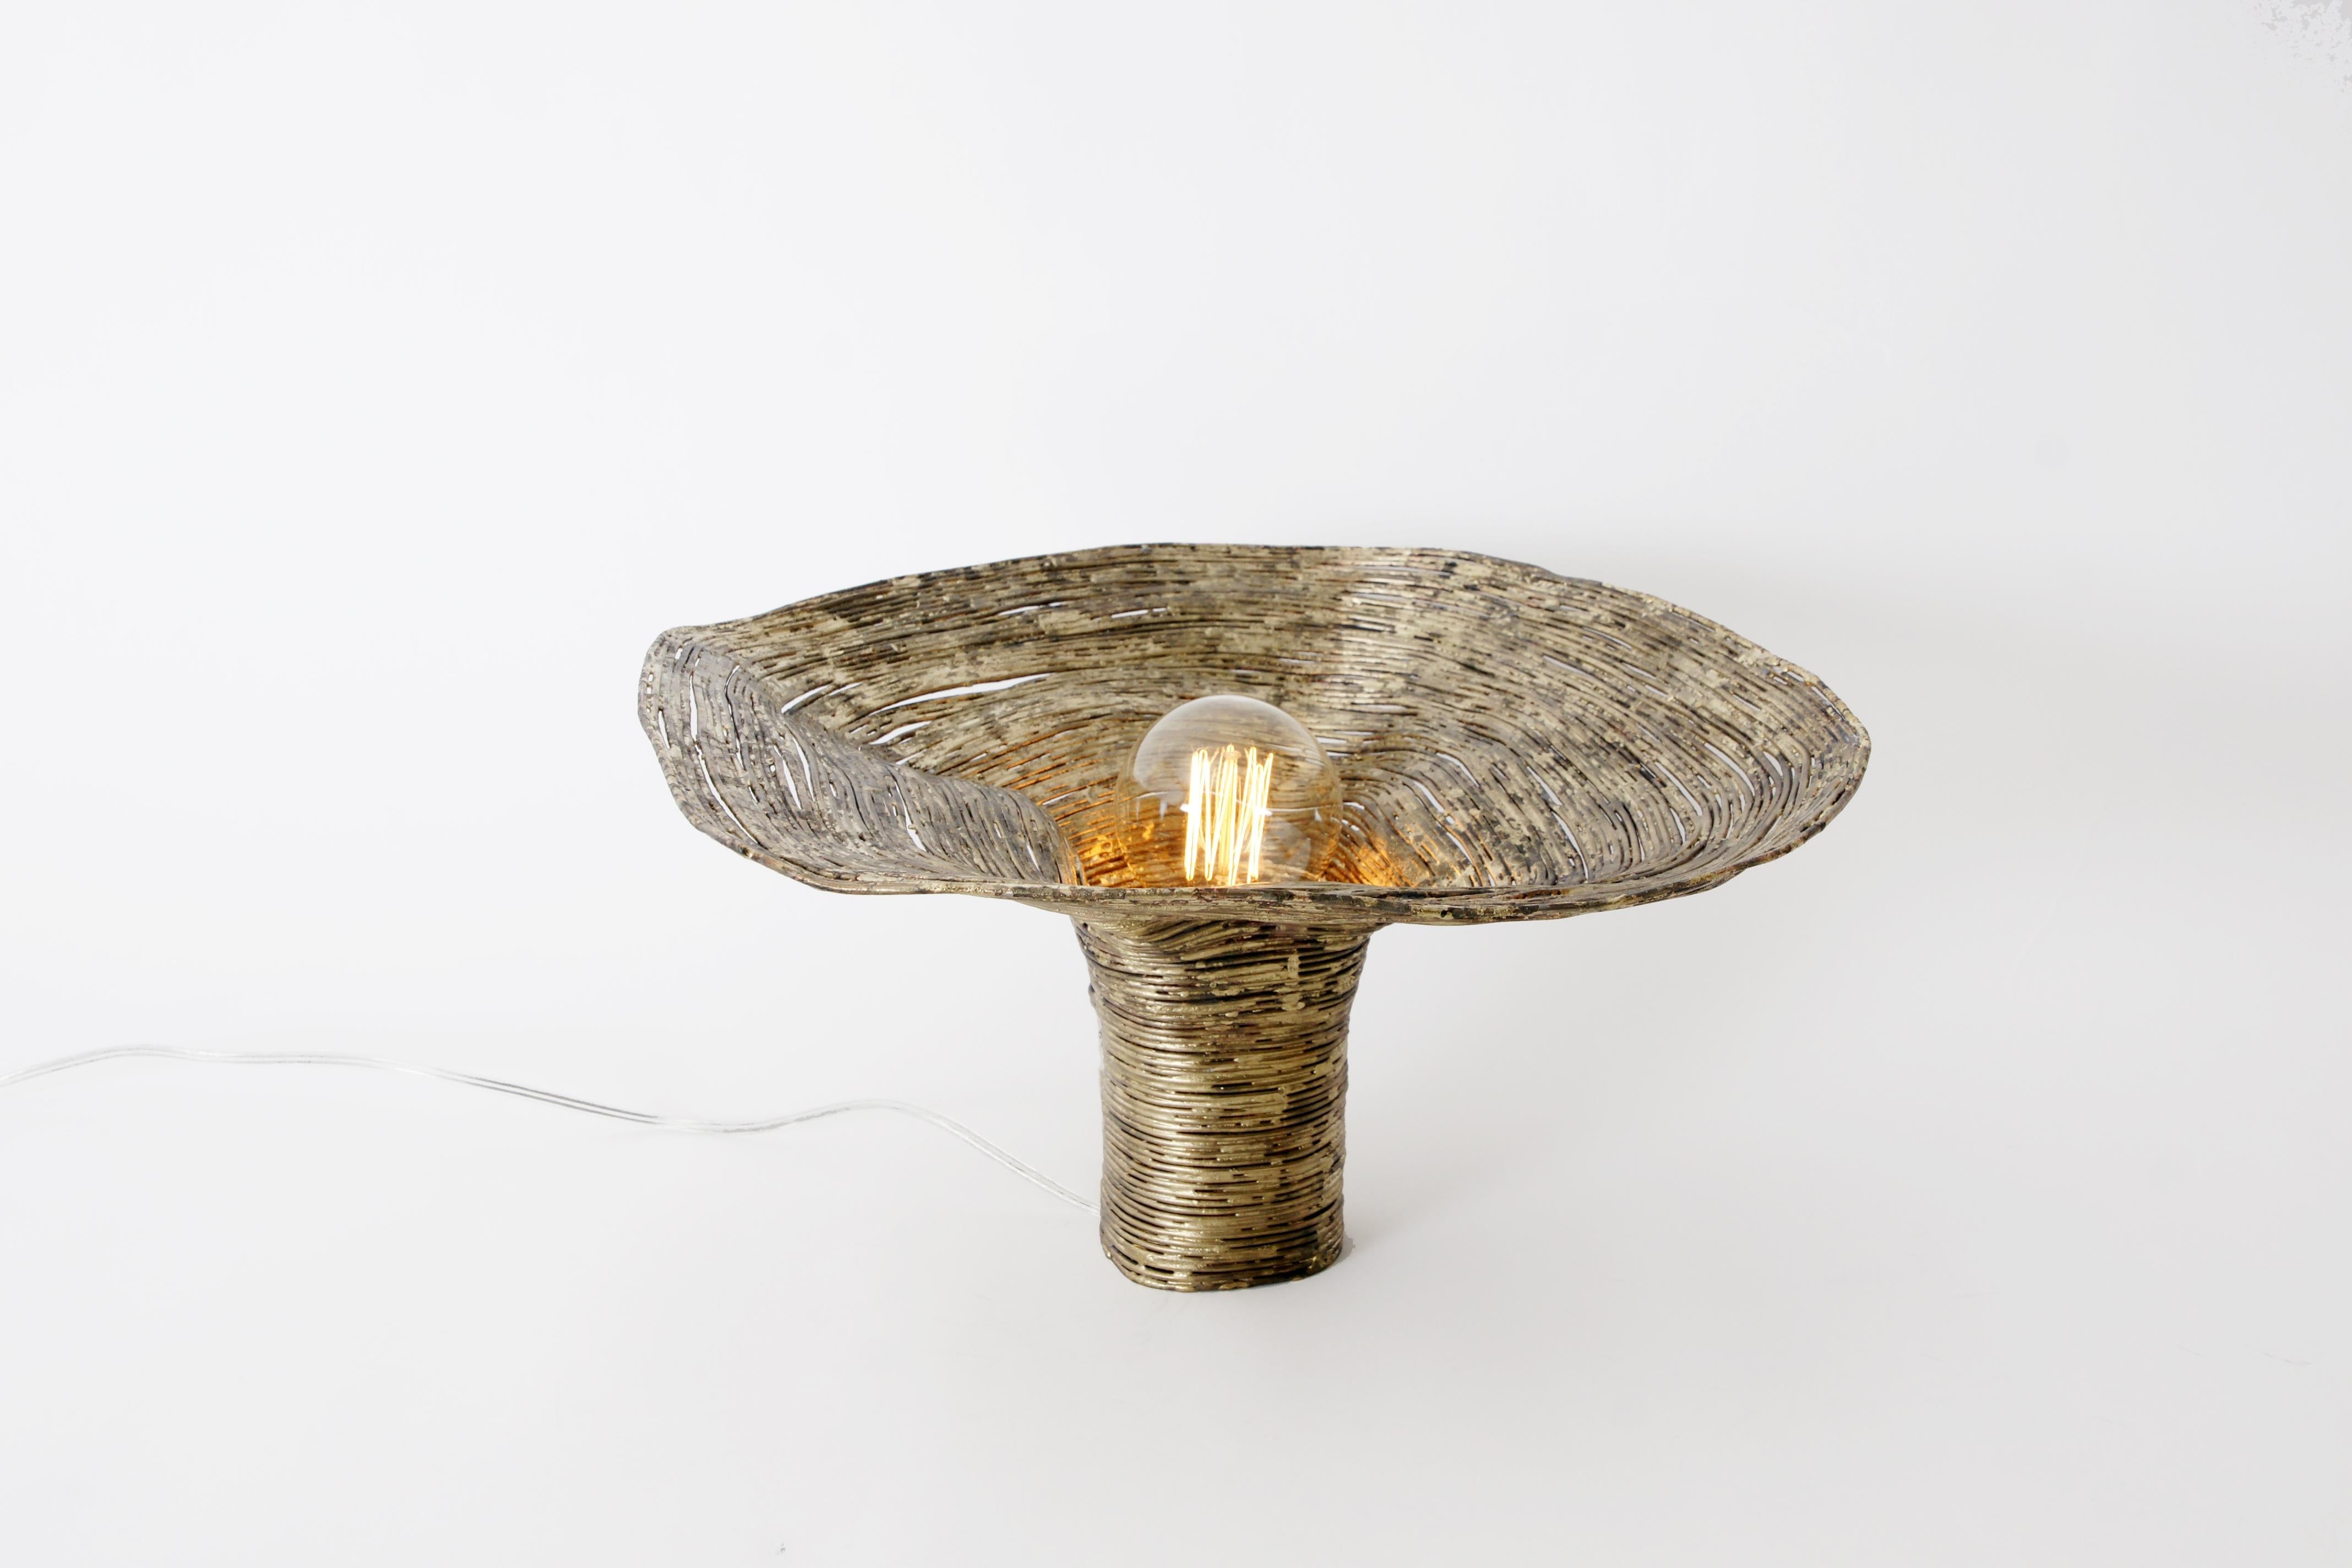 Wrap spruce table light by Johannes Hemann.
Materials: Steel wire, brass
Dimensions: height 27cm, Ø 42cm.

‘wrap, the series of objects by German designer Johannes Hemann examines the shells of things remaining after their disappearance. For